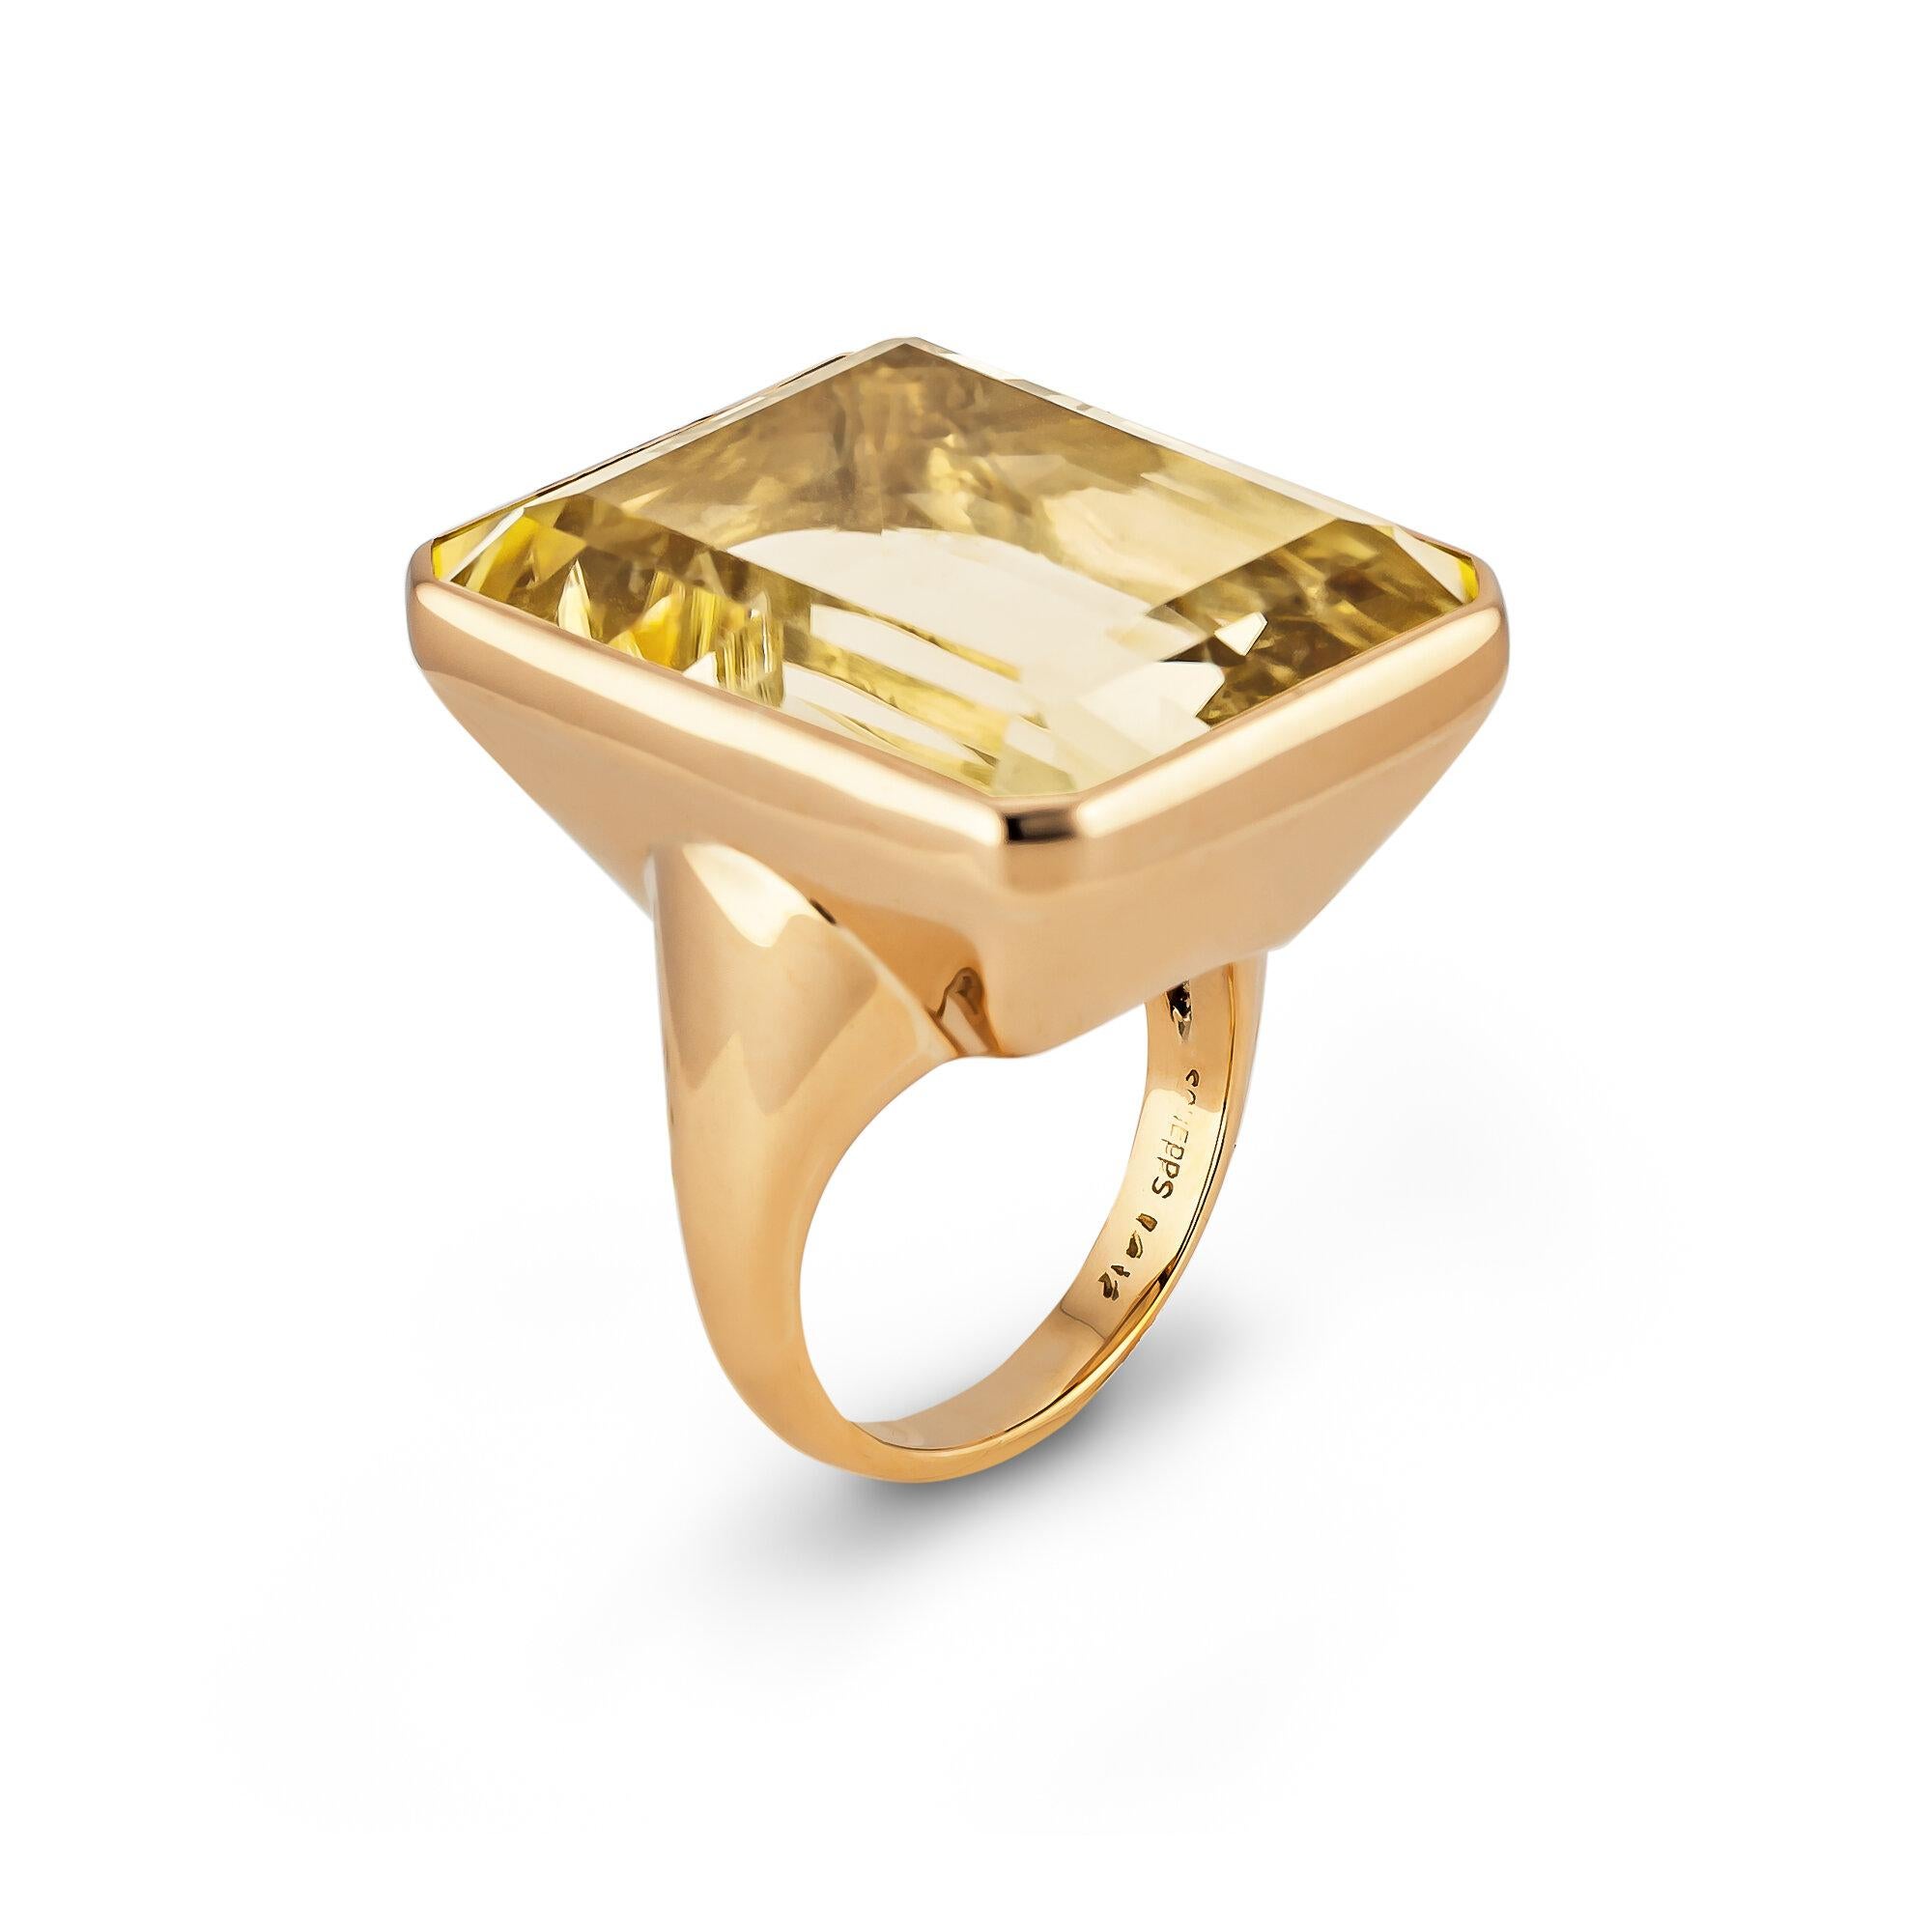 Streamlined and sleek, this Seaman Schepps mid-century 40 carat emerald cut citrine ring is both fun and chic.  With an ultra modern 14 karat yellow gold handmade mounting, this circa 1940-45 ring is a real show stopper.  Signed Schepps.  Size 6 and